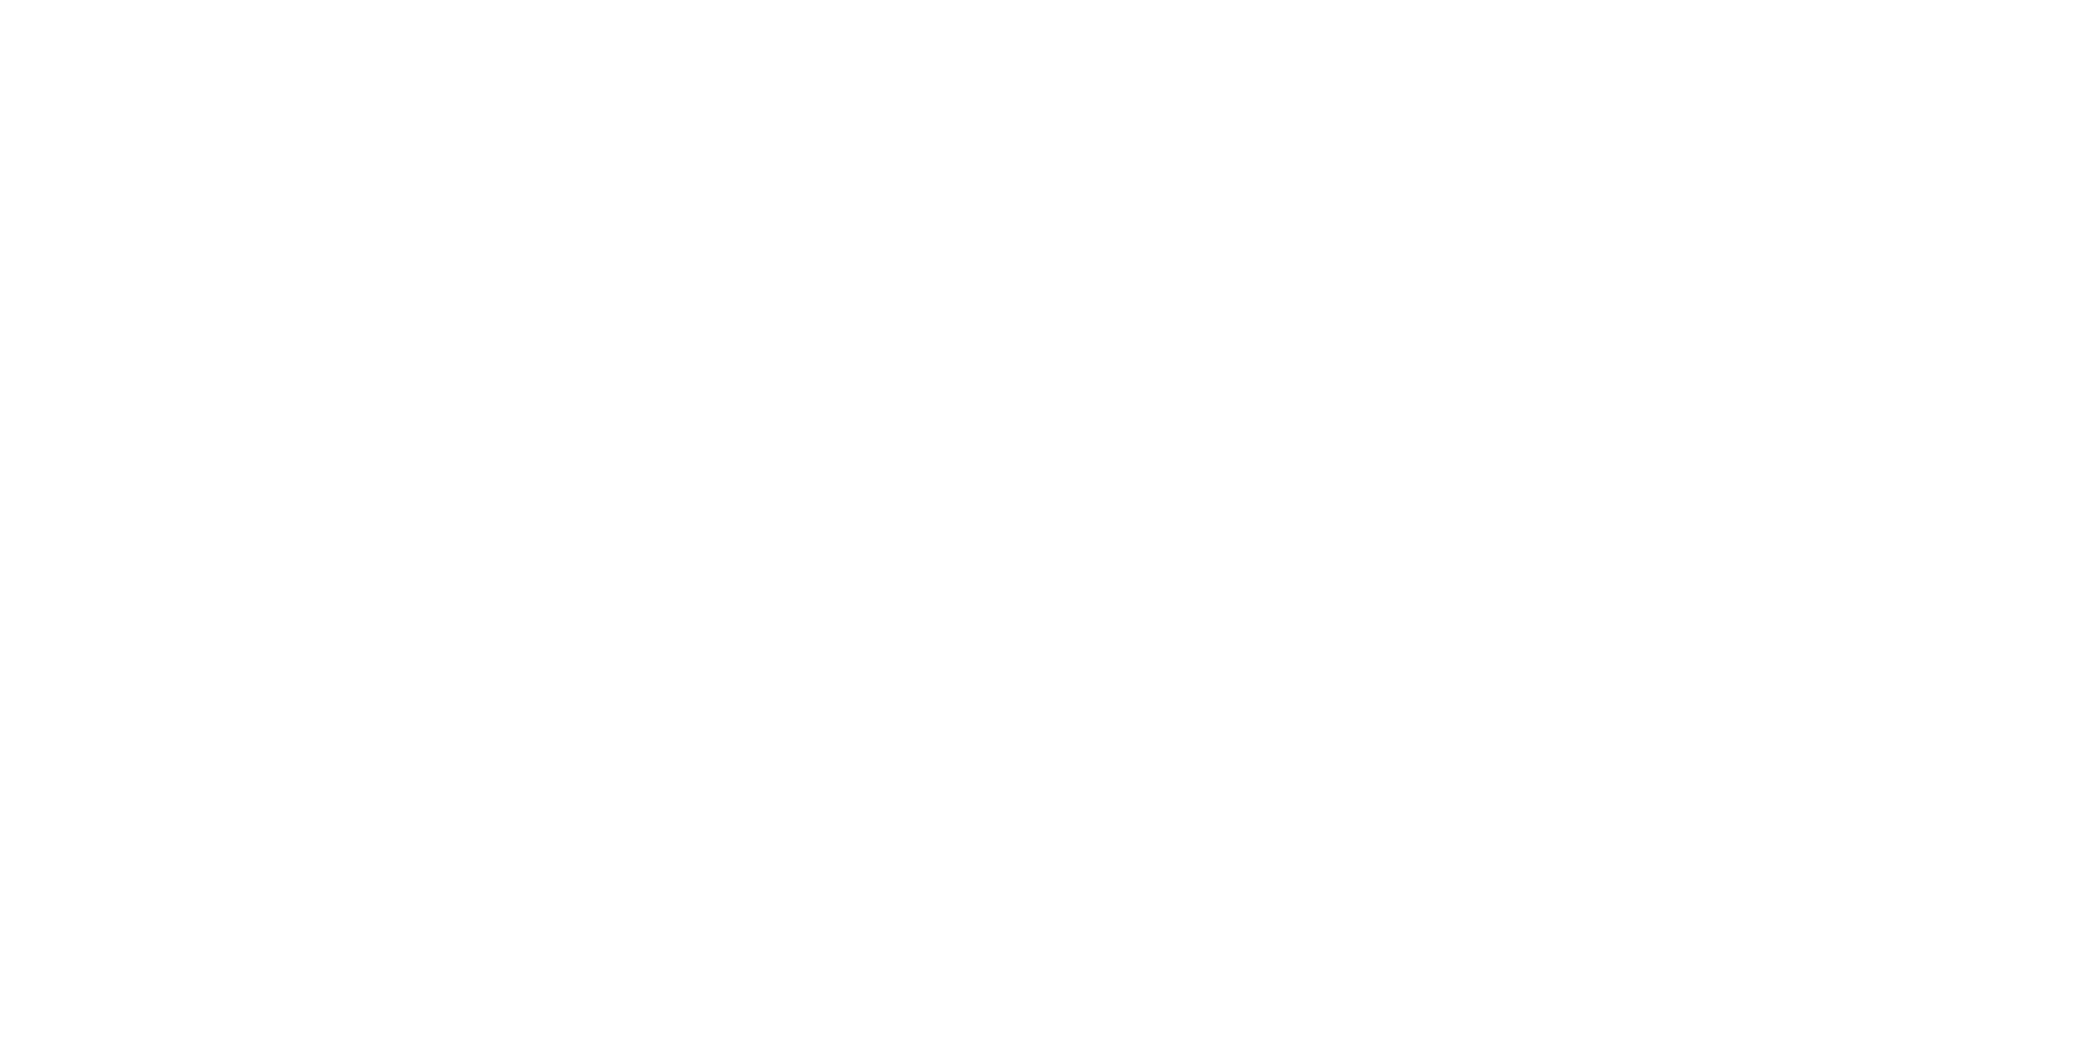 Rancher Logo - Rancher Brand Guidelines & Resources